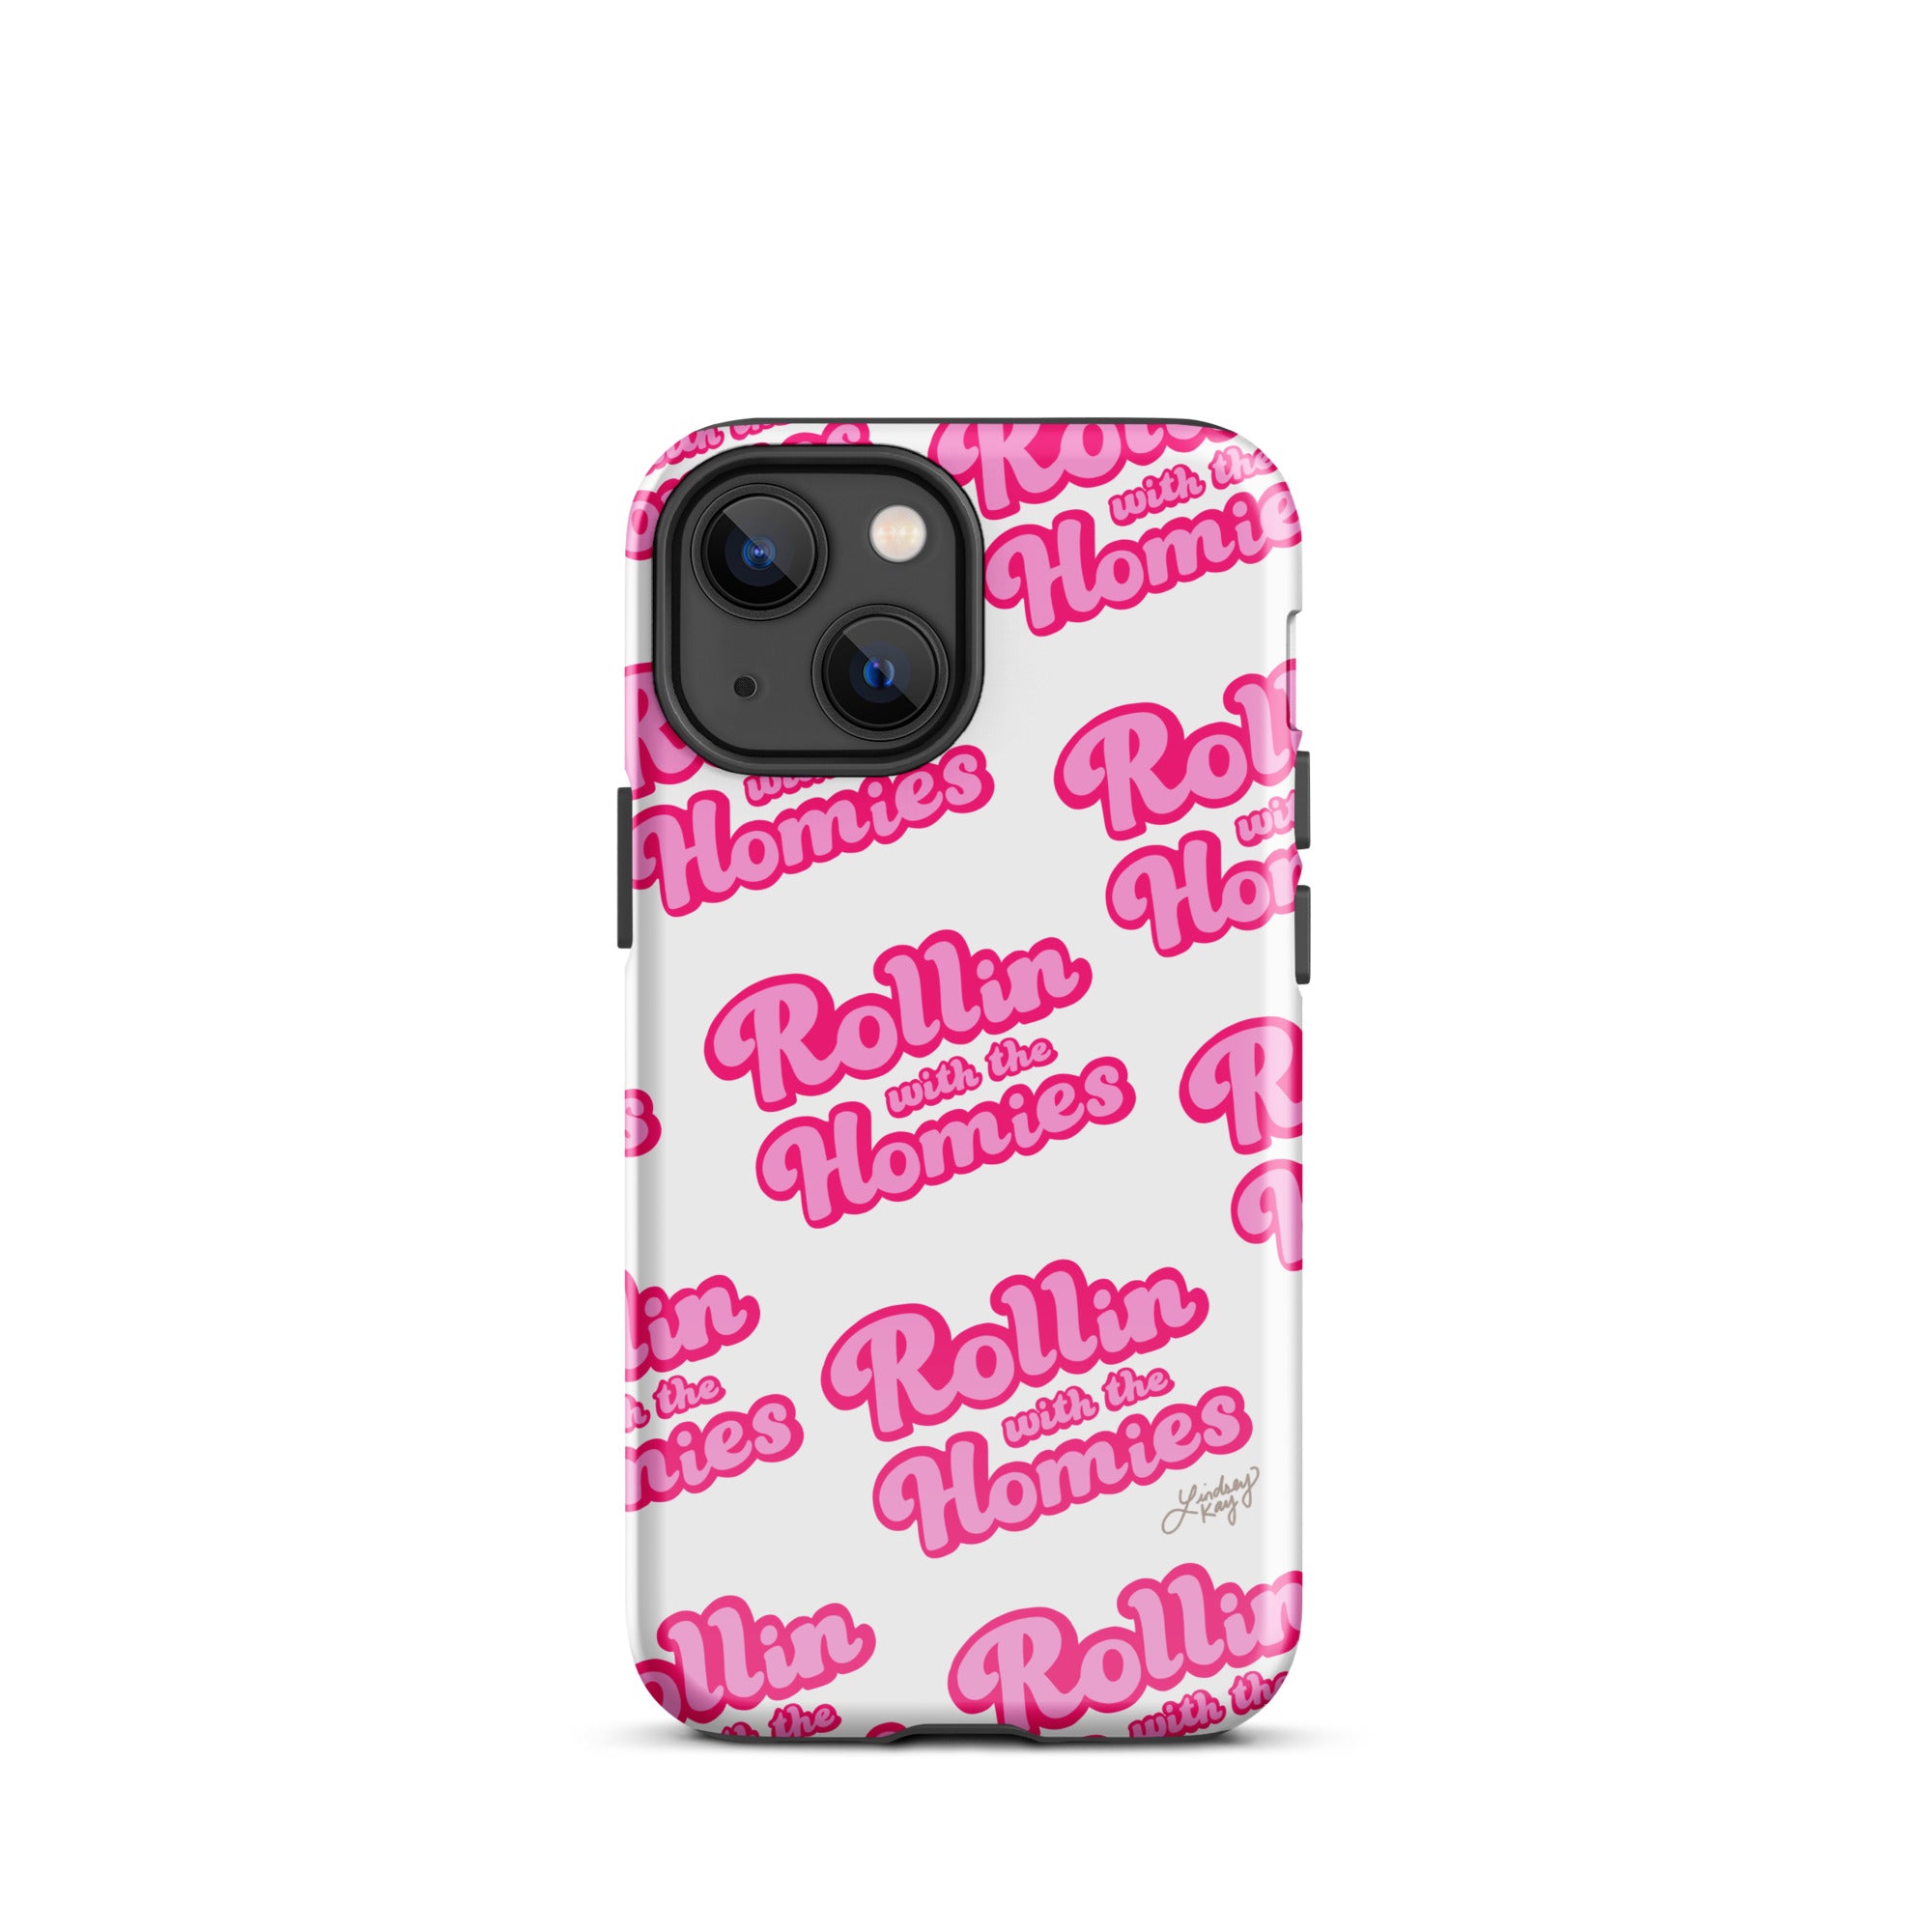 Rollin With the Homies - Tough Case for iPhone®